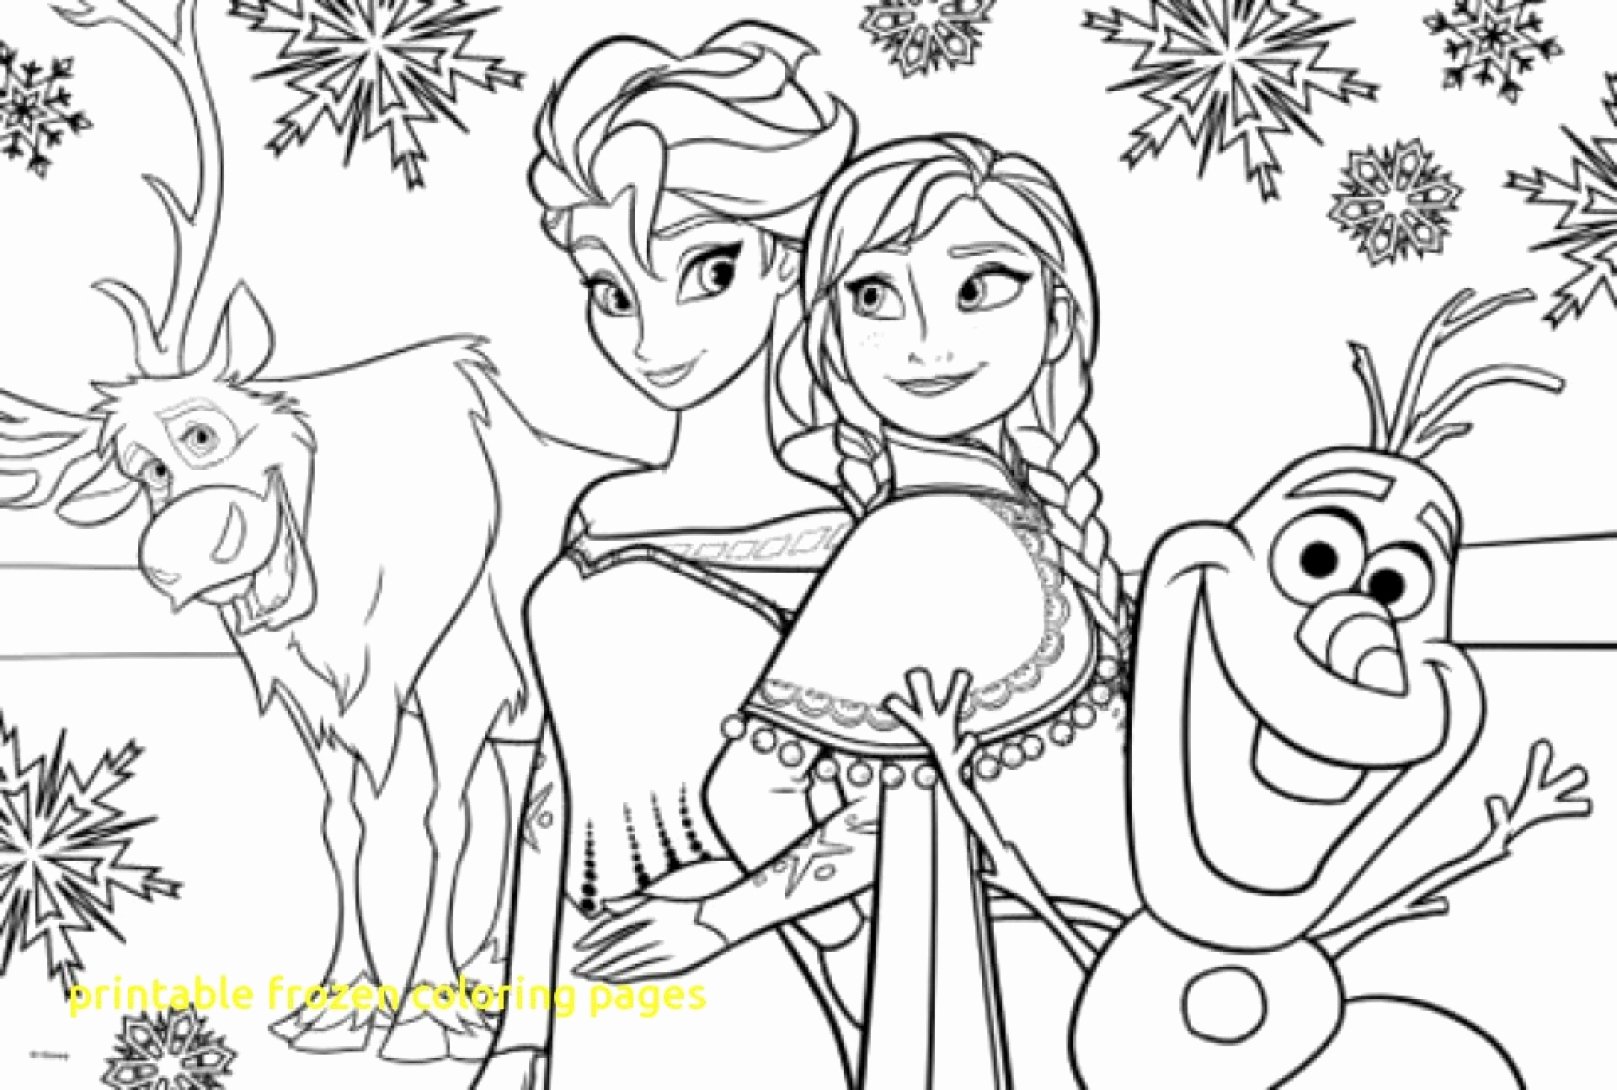 number-two-coloring-pages-for-kids